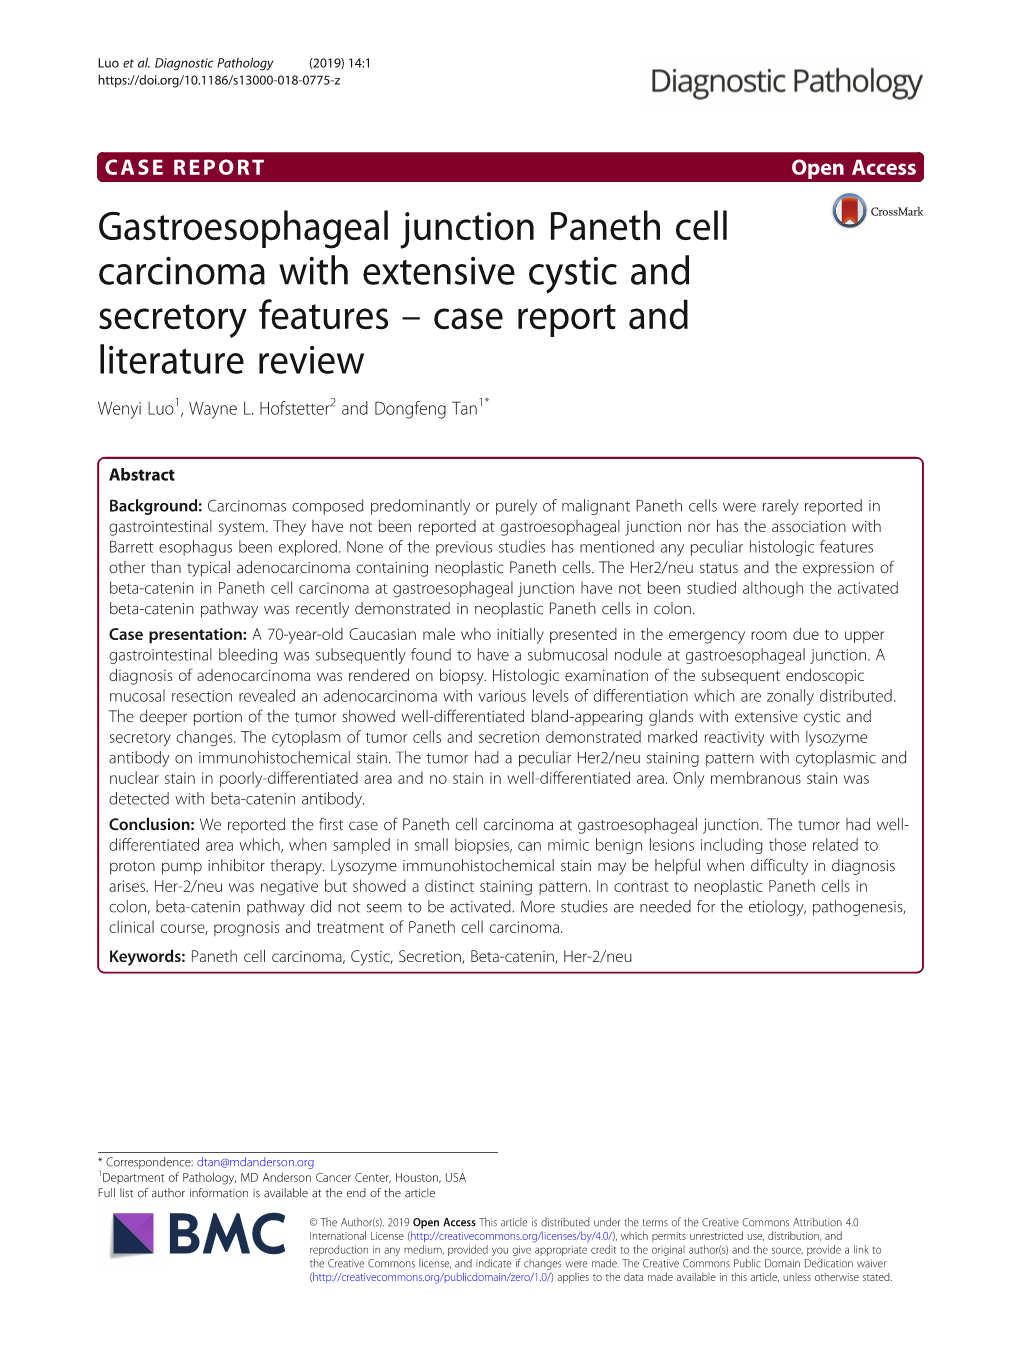 Gastroesophageal Junction Paneth Cell Carcinoma with Extensive Cystic and Secretory Features – Case Report and Literature Review Wenyi Luo1, Wayne L